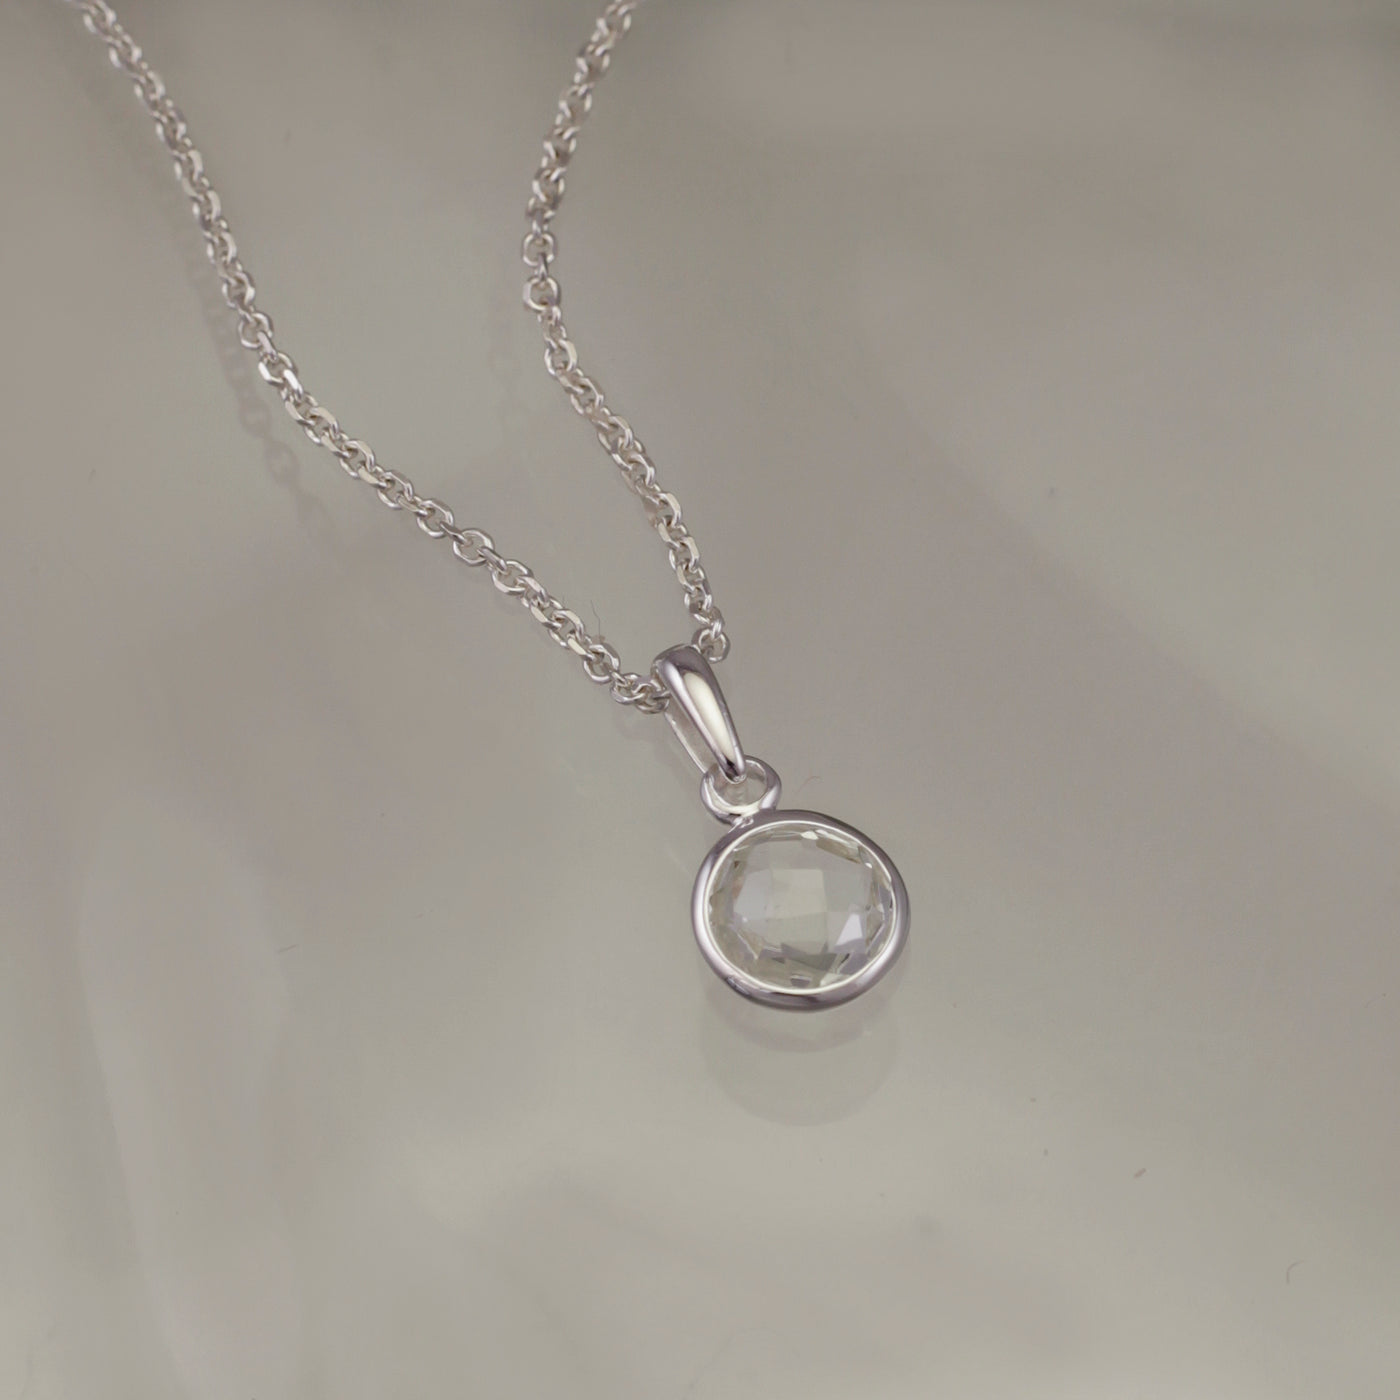 Image of Silver and White Topaz Pendant Necklace